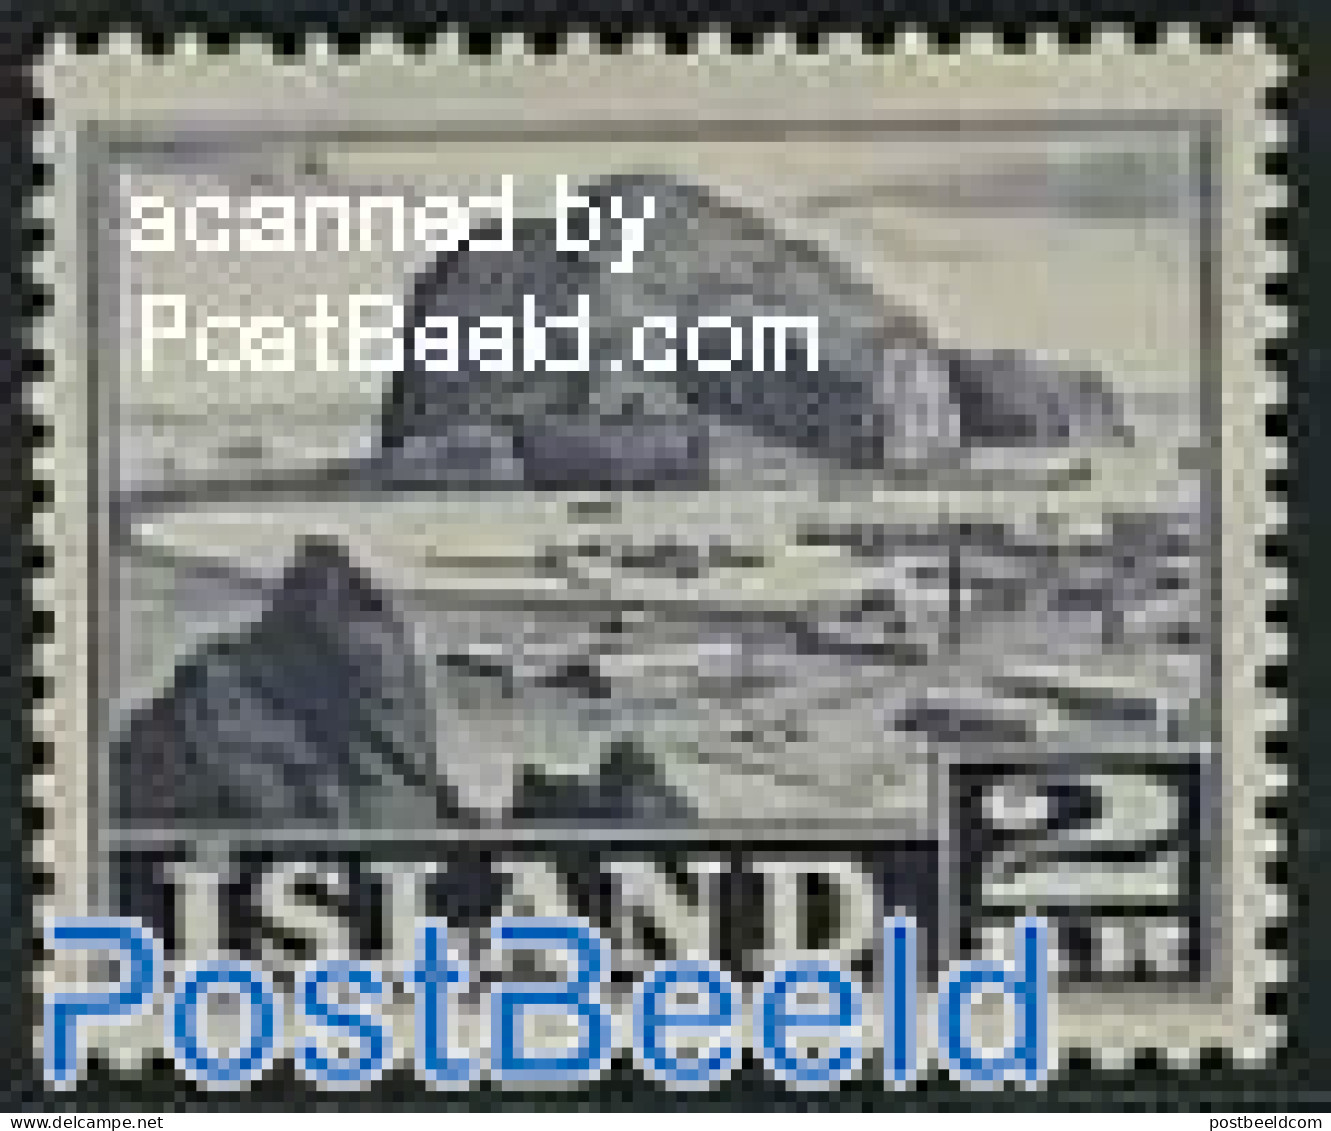 Iceland 1950 2Kr, Stamp Out Of Set, Unused (hinged), Various - Lighthouses & Safety At Sea - Ongebruikt